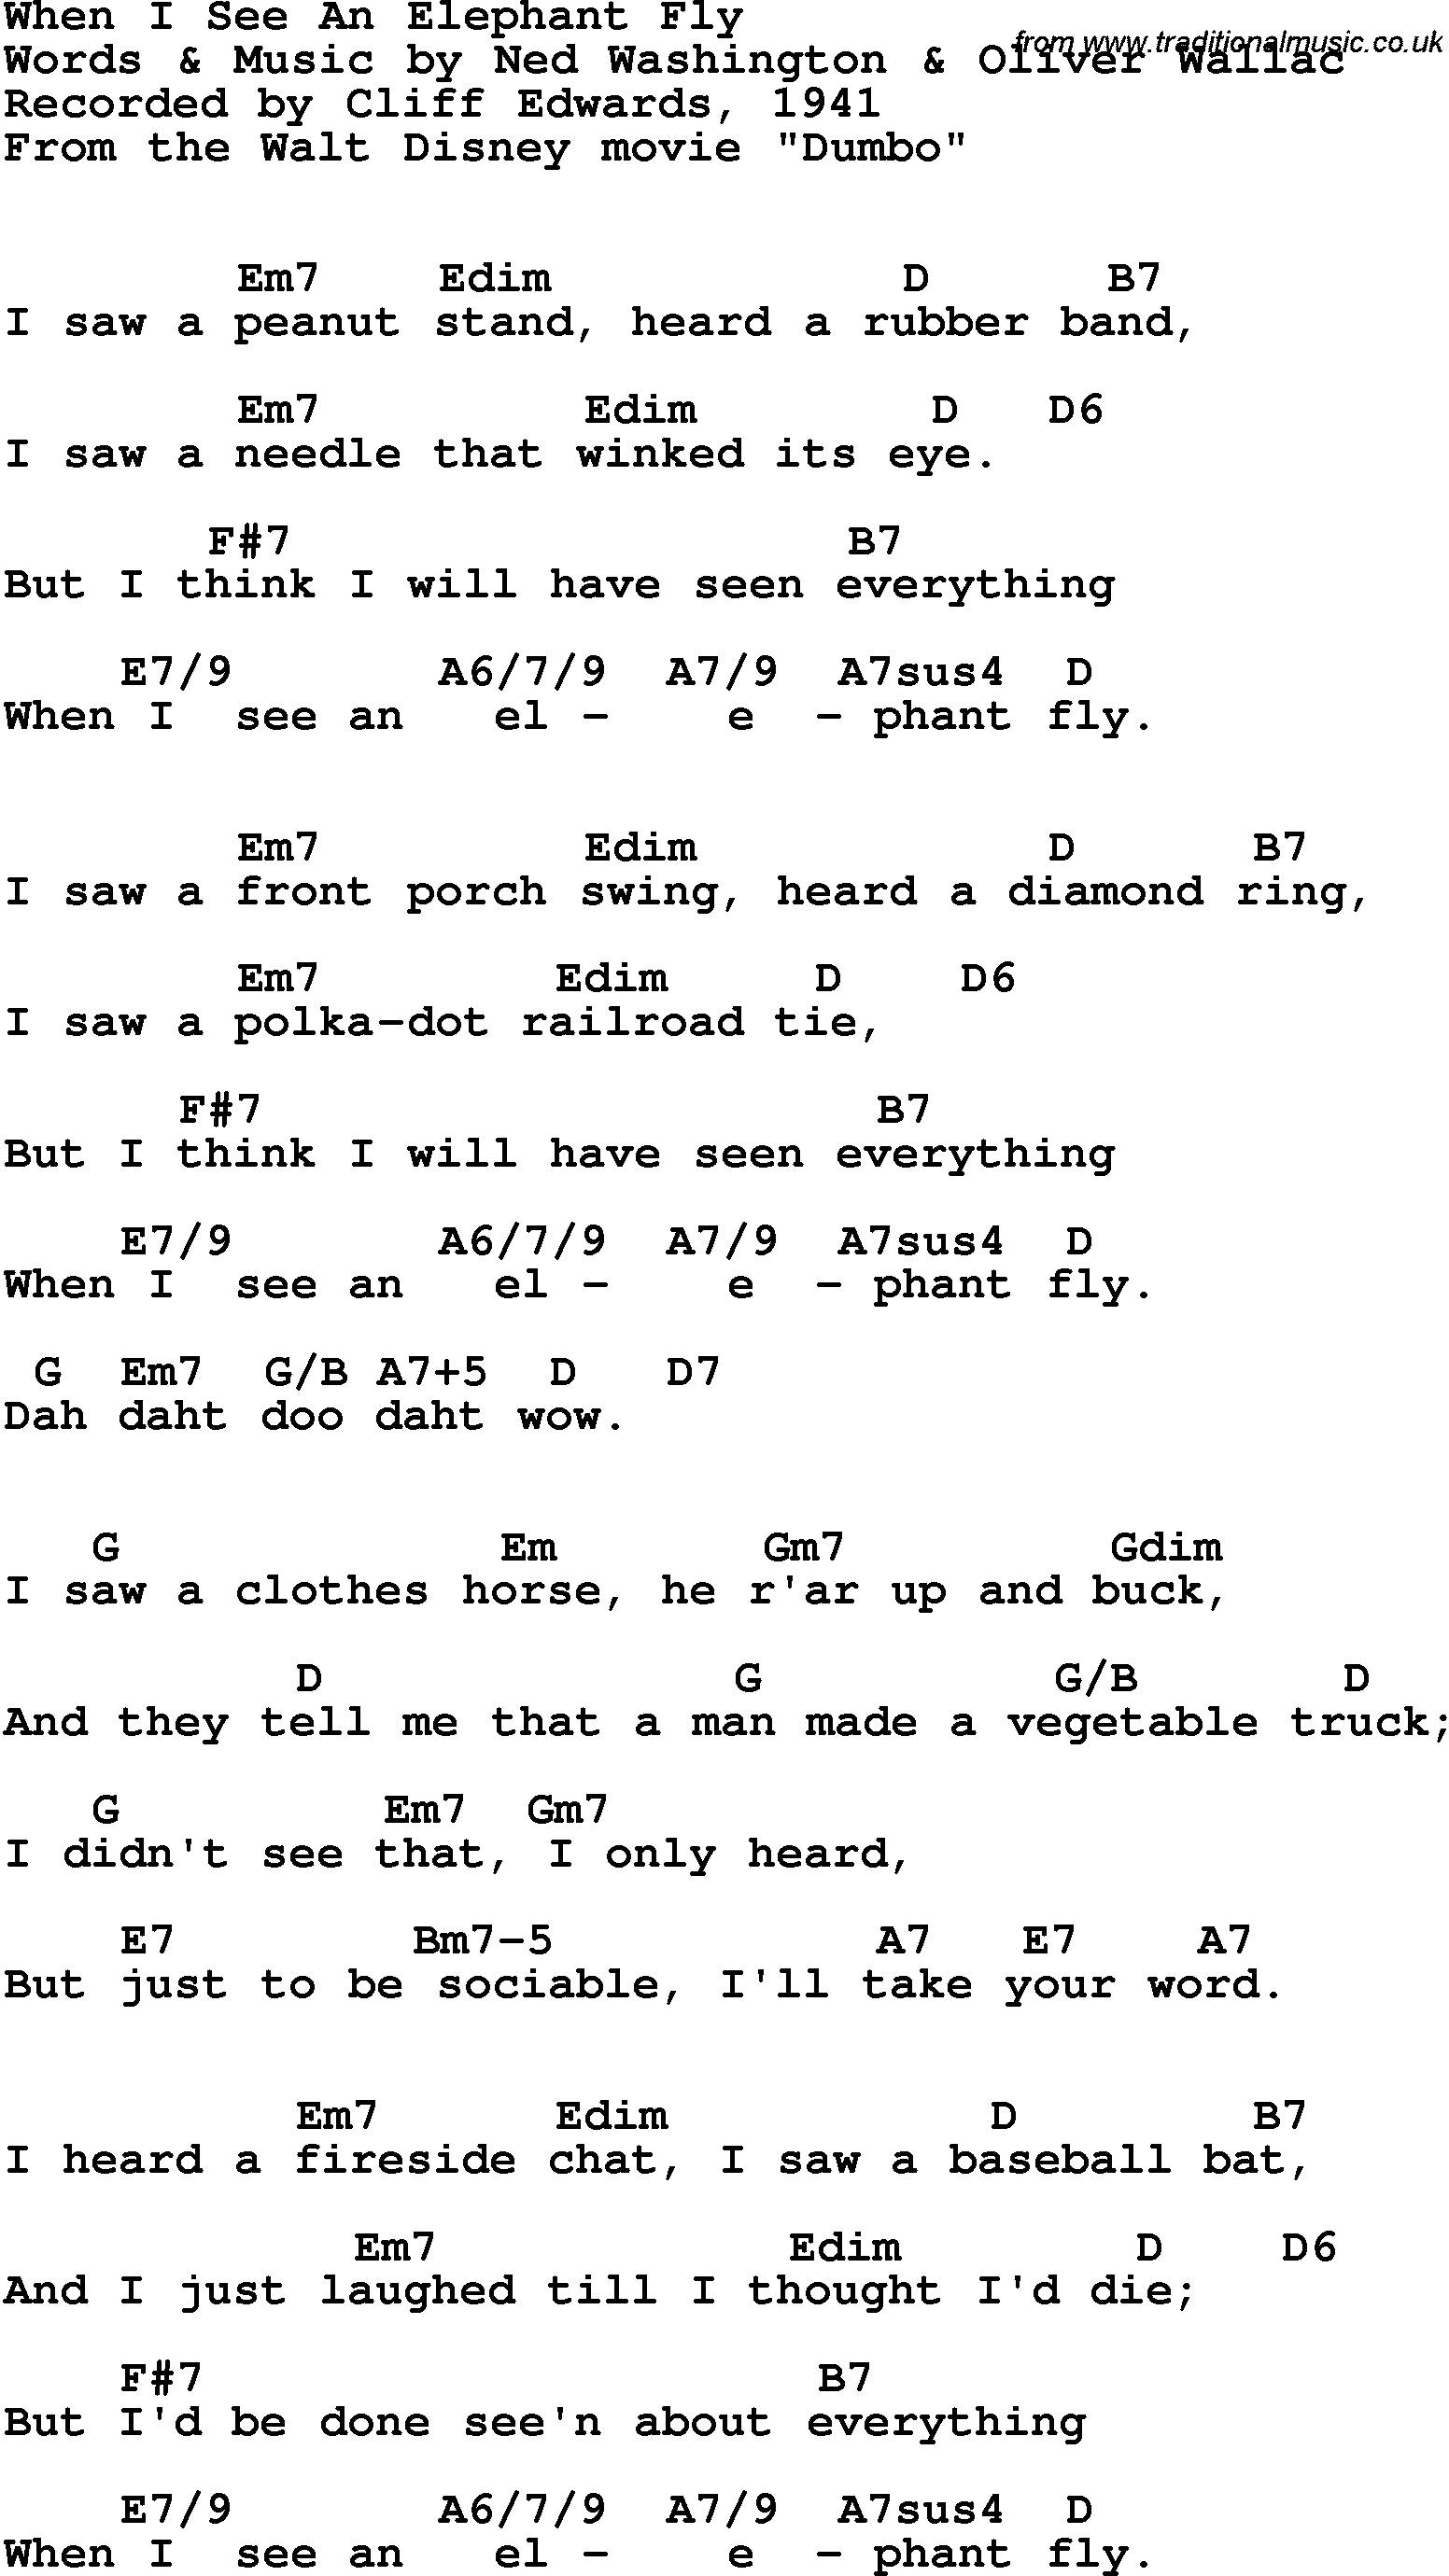 Song Lyrics with guitar chords for When I See An Elephant Fly - Cliff Edwards, 1941